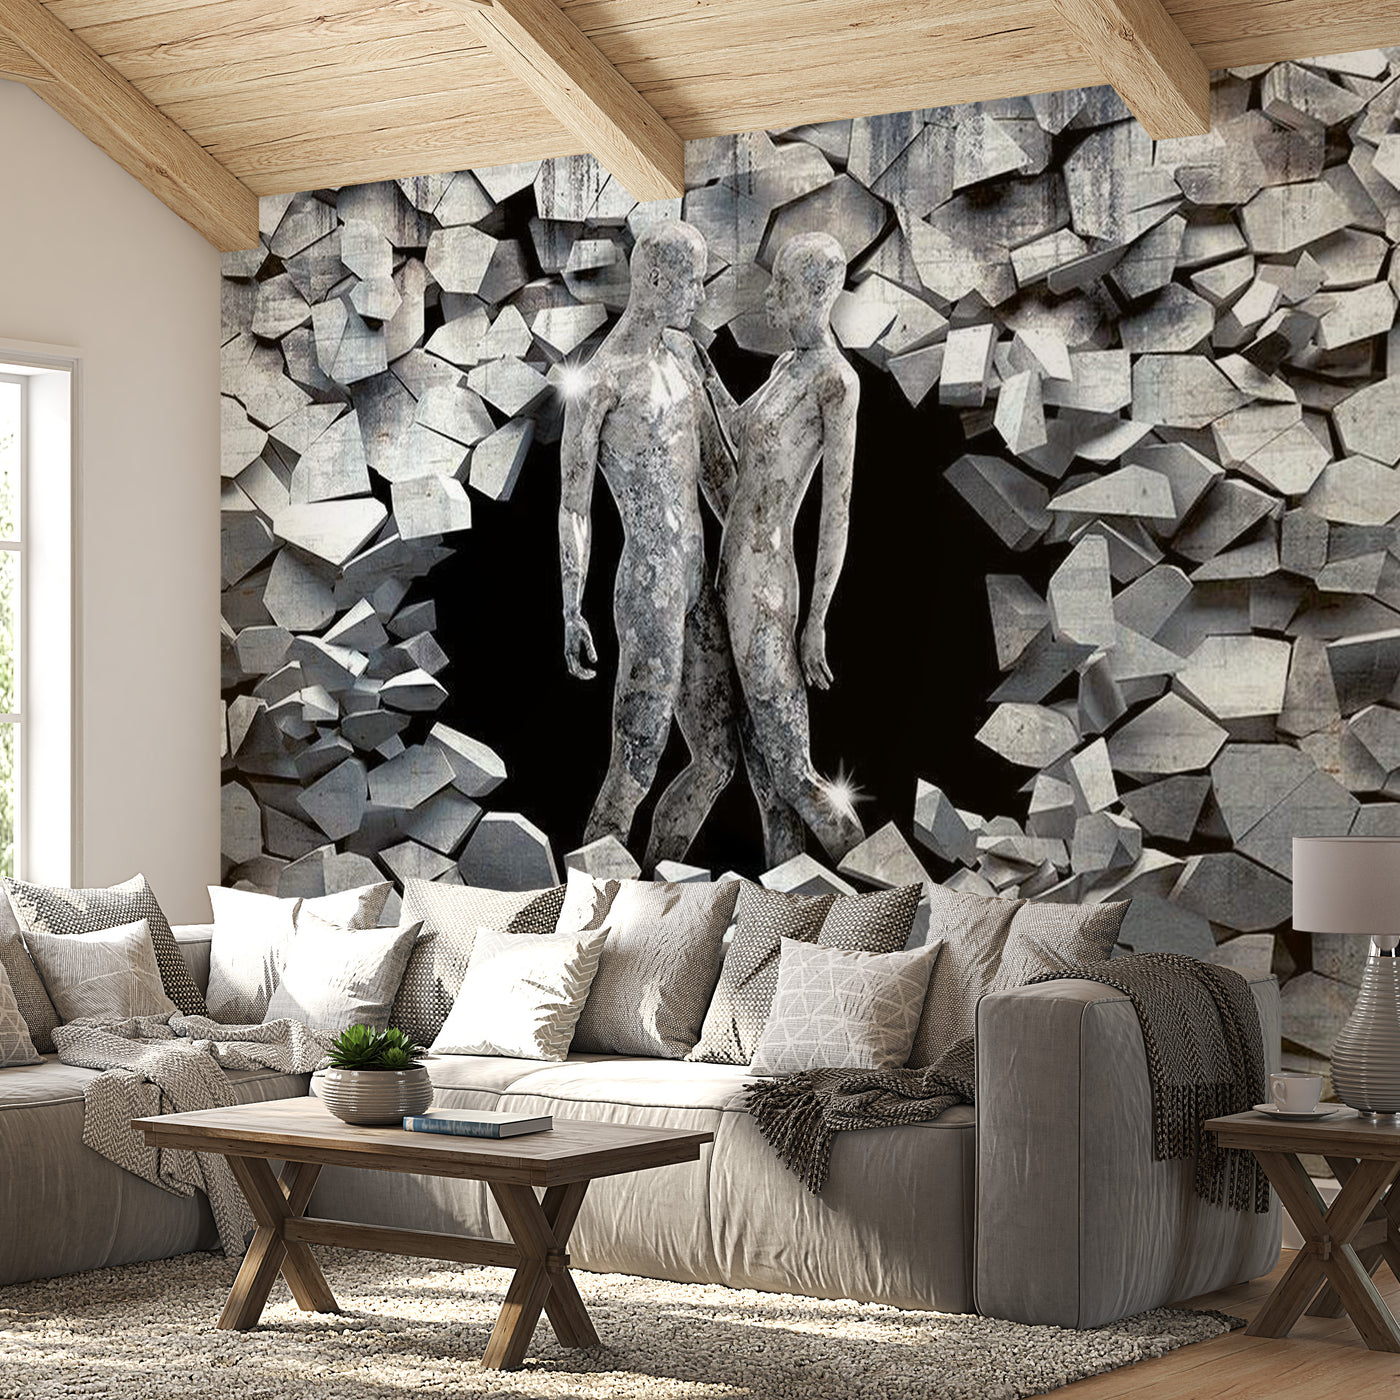 3D Illusion Peel & Stick Wall Mural - Stone People - Removable Wall Decals